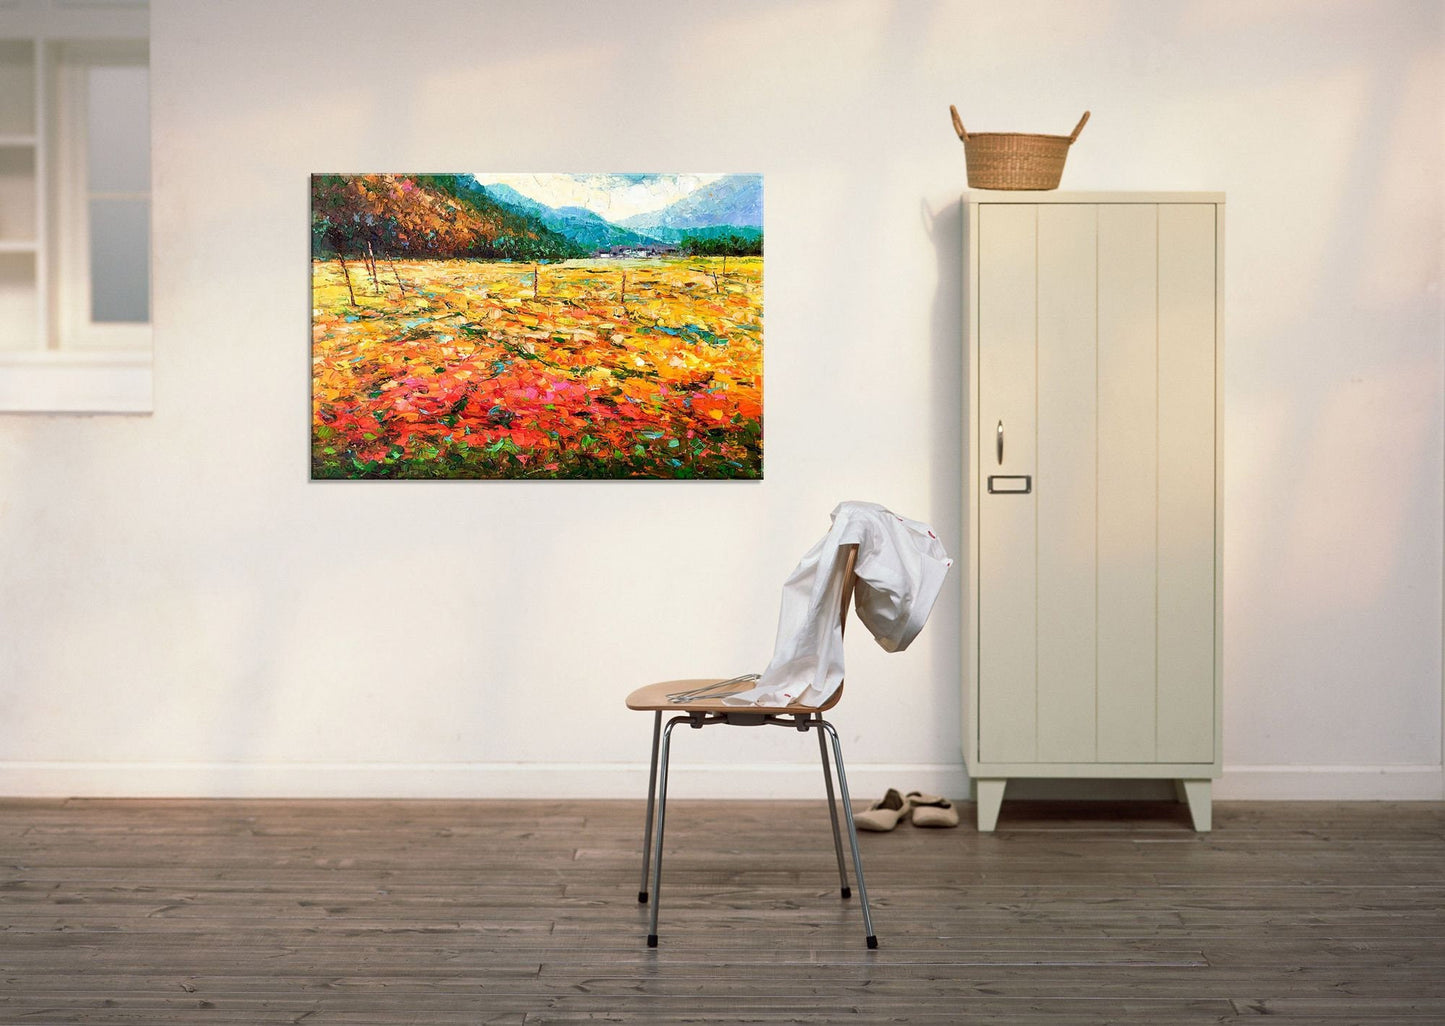 Large Oil Painting Landscape Spring Fields by the Mountain, Large Canvas Wall Art, Original Oil Painting, Original Landscape Painting Yellow